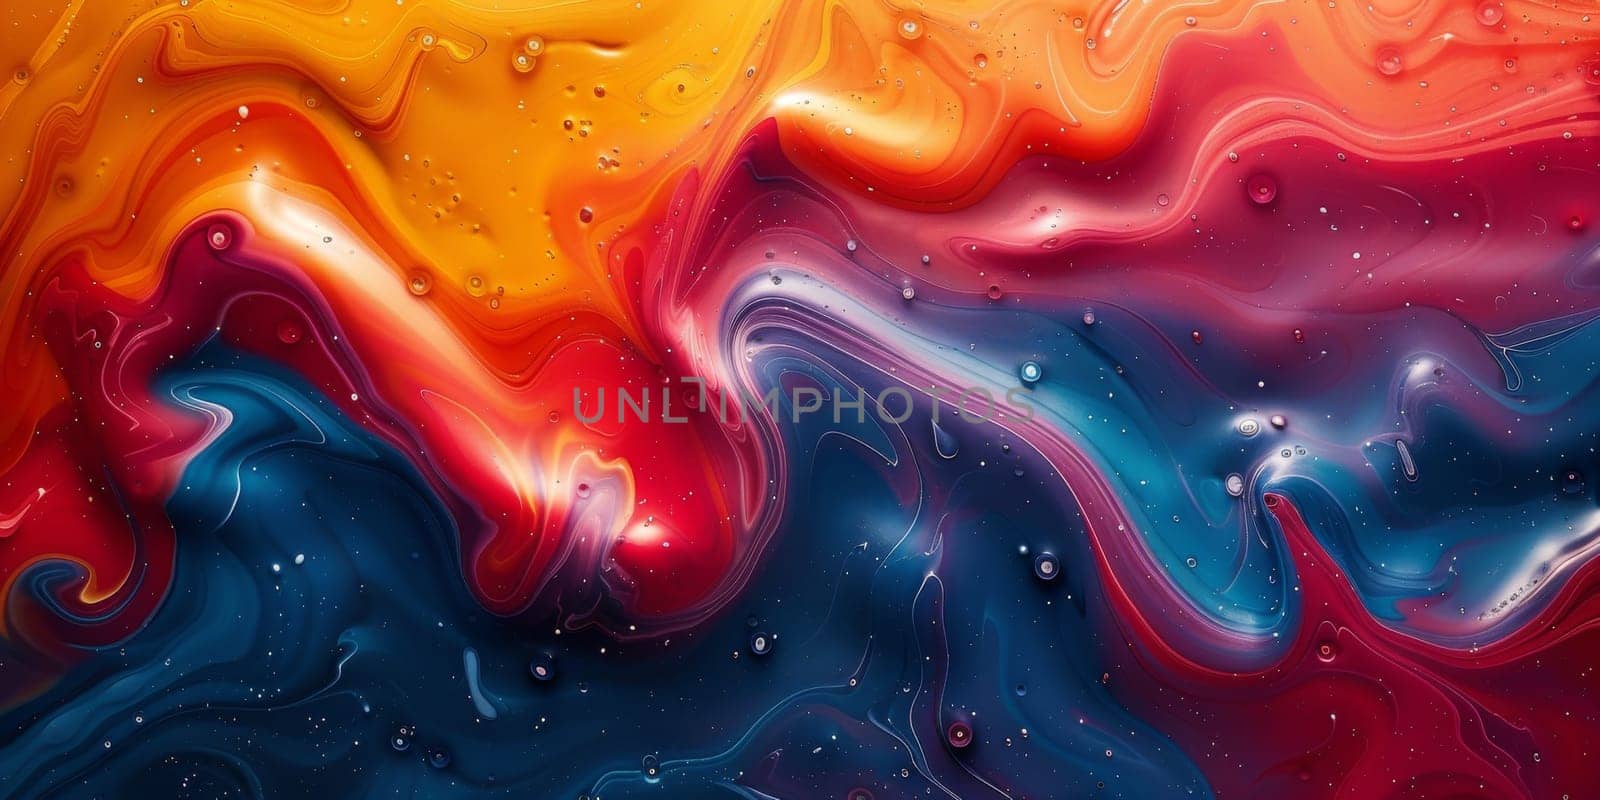 Colorful textured abstract art background. Creativity banner.